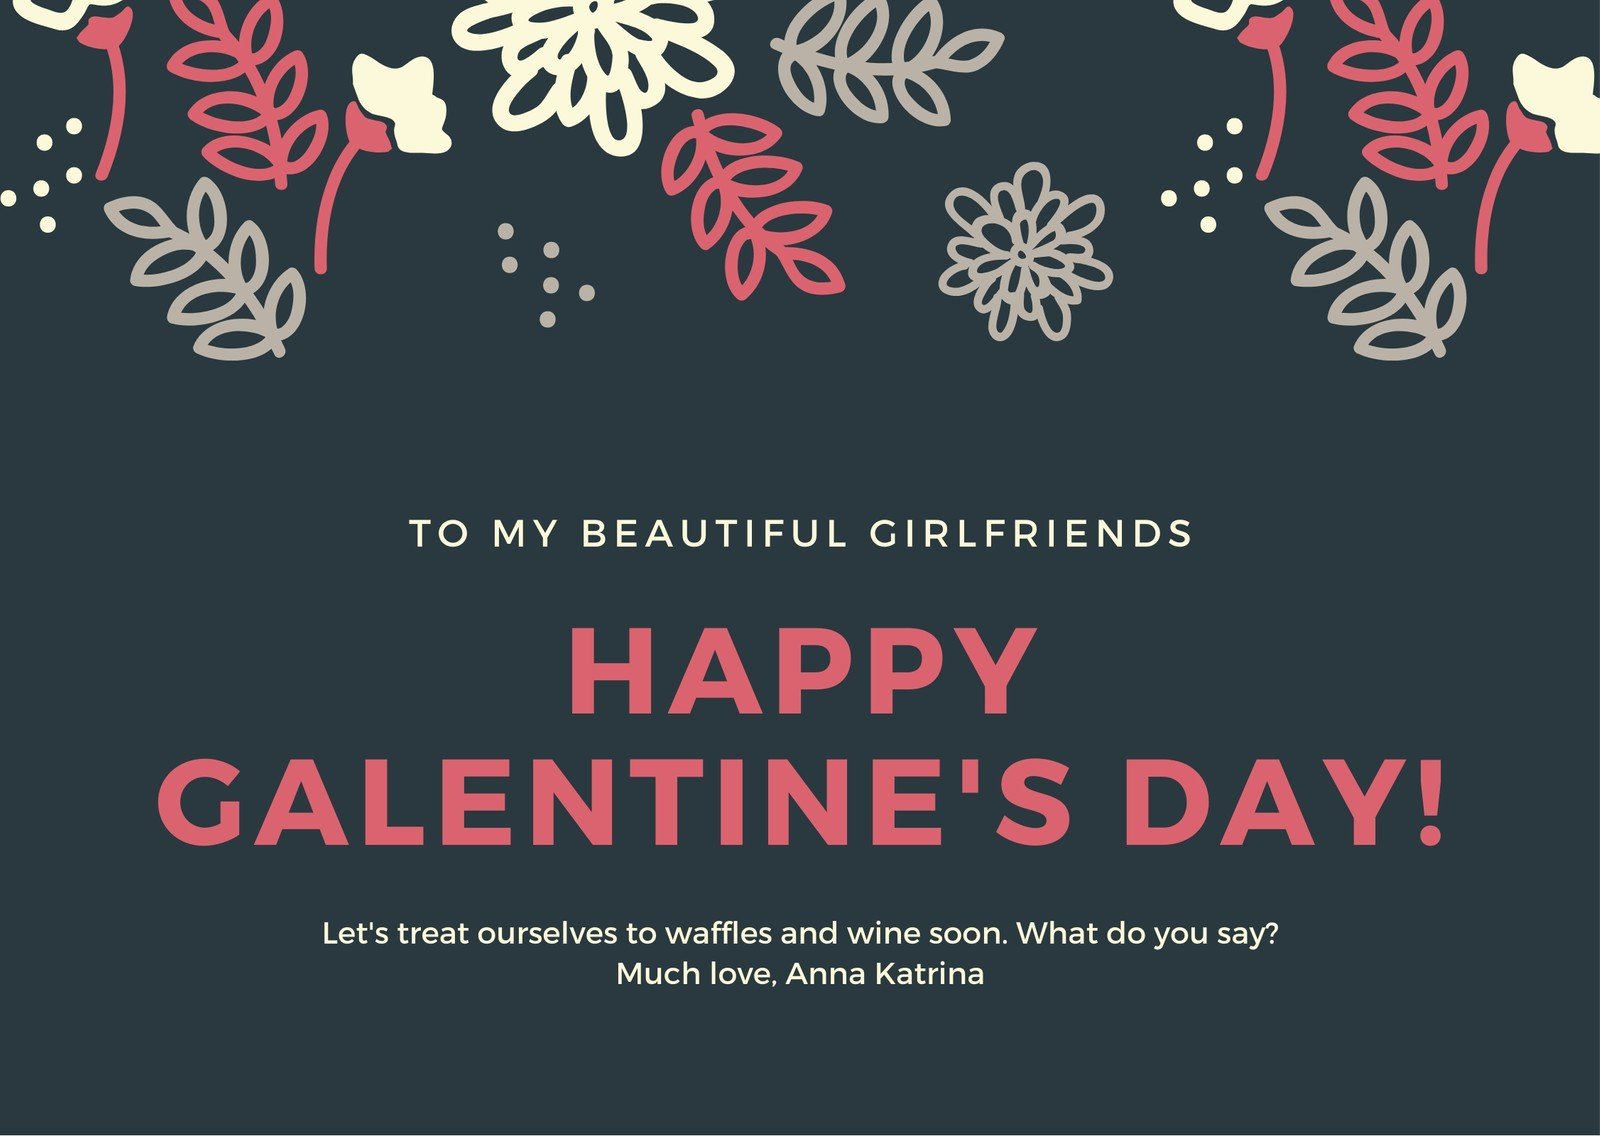 copy-of-galentine-s-day-invitation-template-postermywall